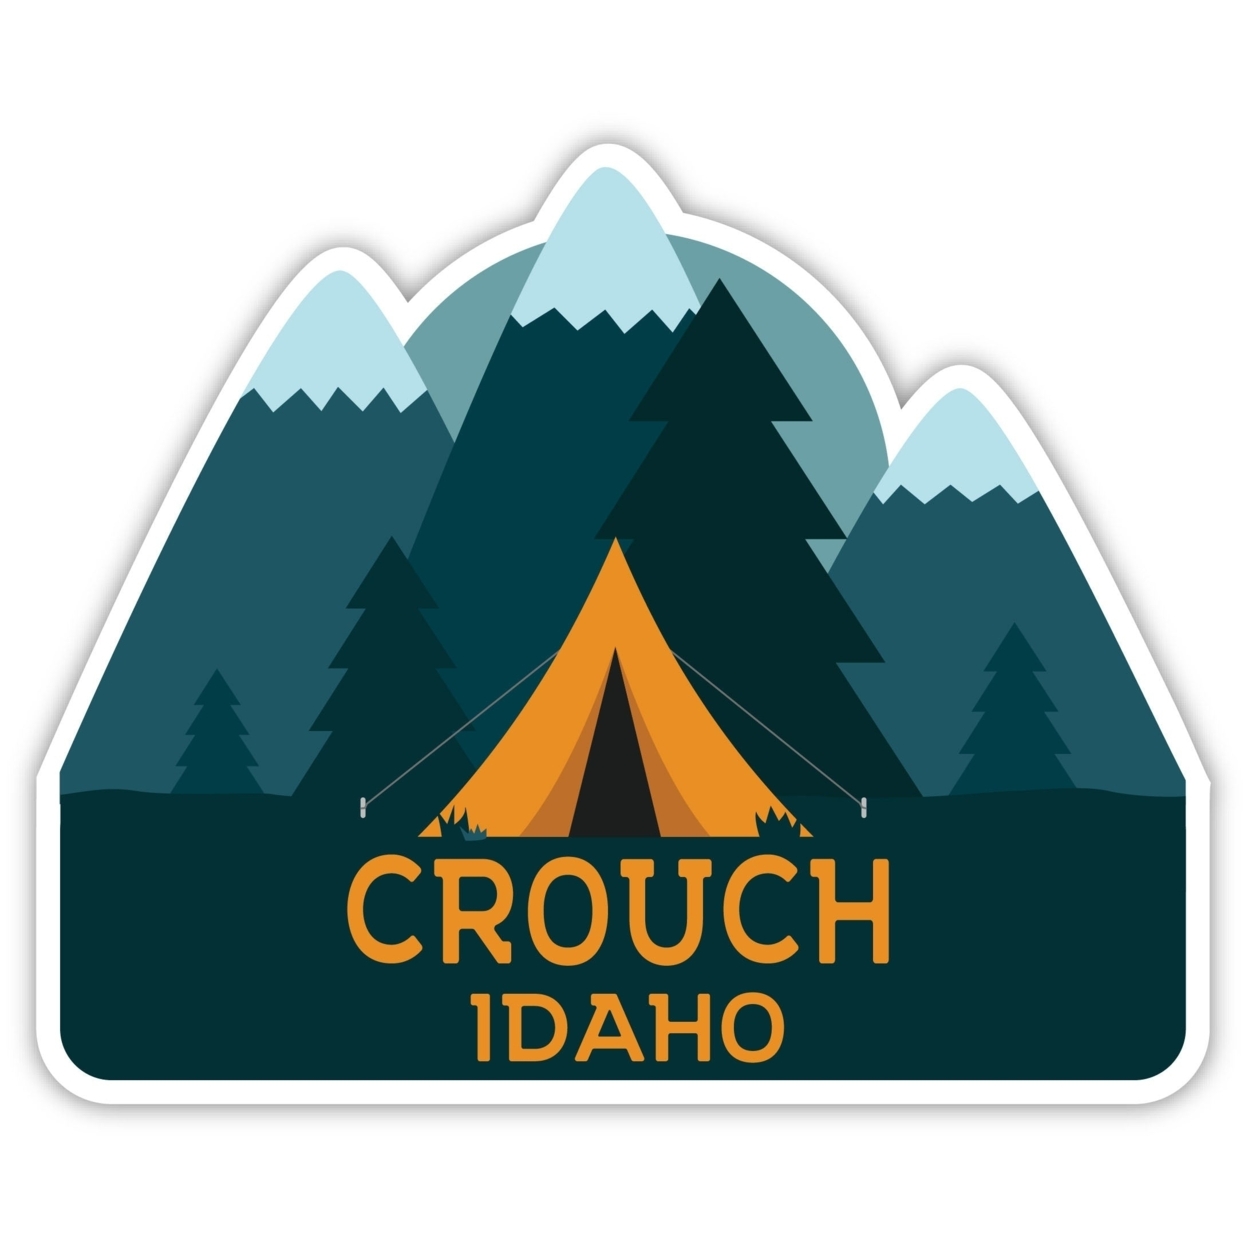 Crouch Idaho Souvenir Decorative Stickers (Choose Theme And Size) - Single Unit, 10-Inch, Tent